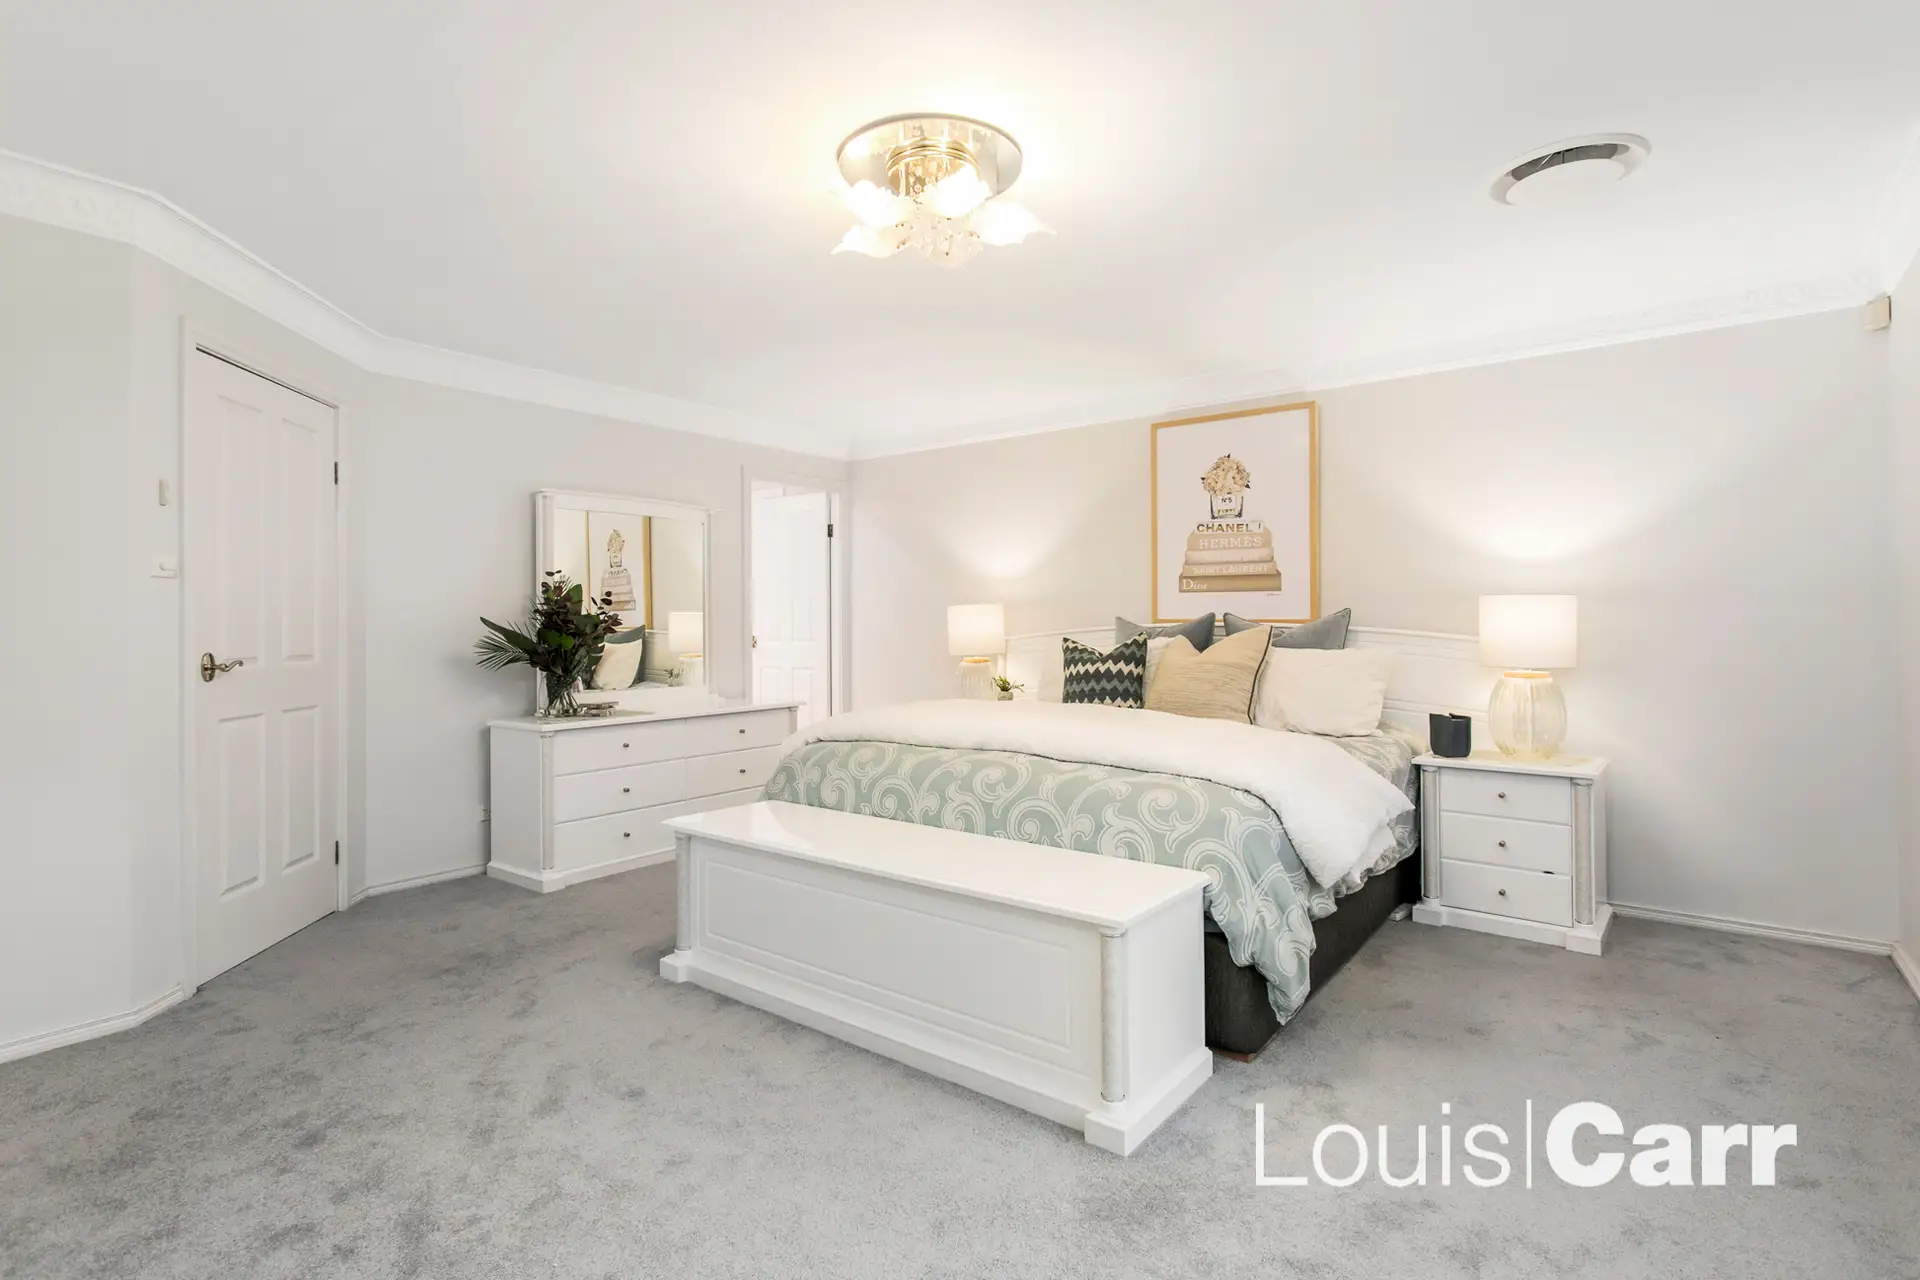 Photo #9: 5 Avonleigh Way, West Pennant Hills - Sold by Louis Carr Real Estate